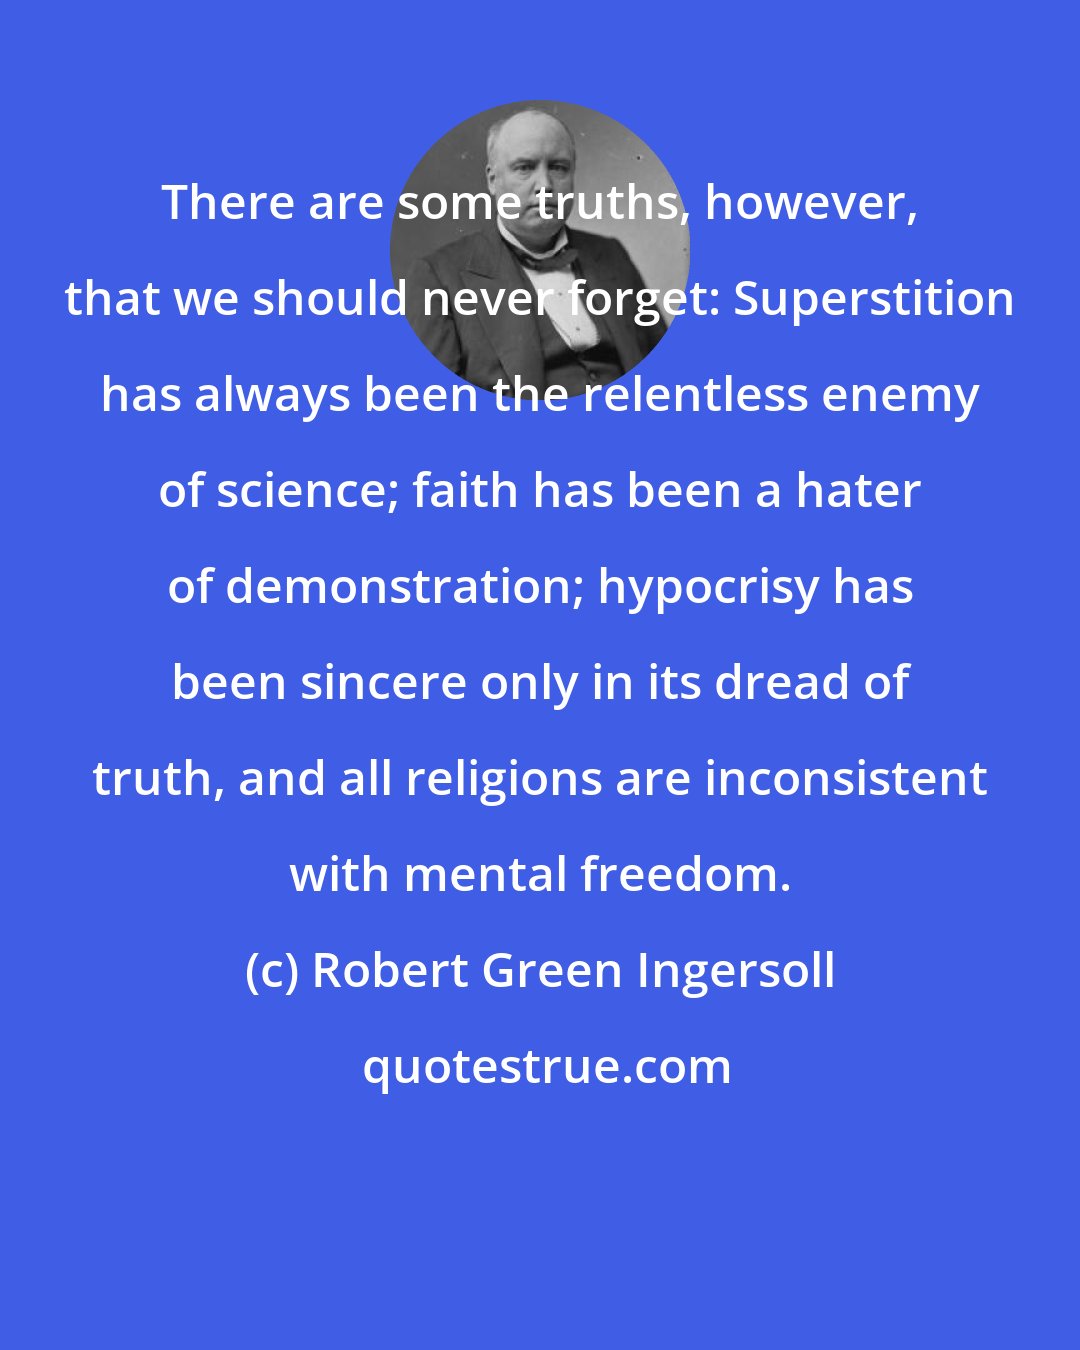 Robert Green Ingersoll: There are some truths, however, that we should never forget: Superstition has always been the relentless enemy of science; faith has been a hater of demonstration; hypocrisy has been sincere only in its dread of truth, and all religions are inconsistent with mental freedom.